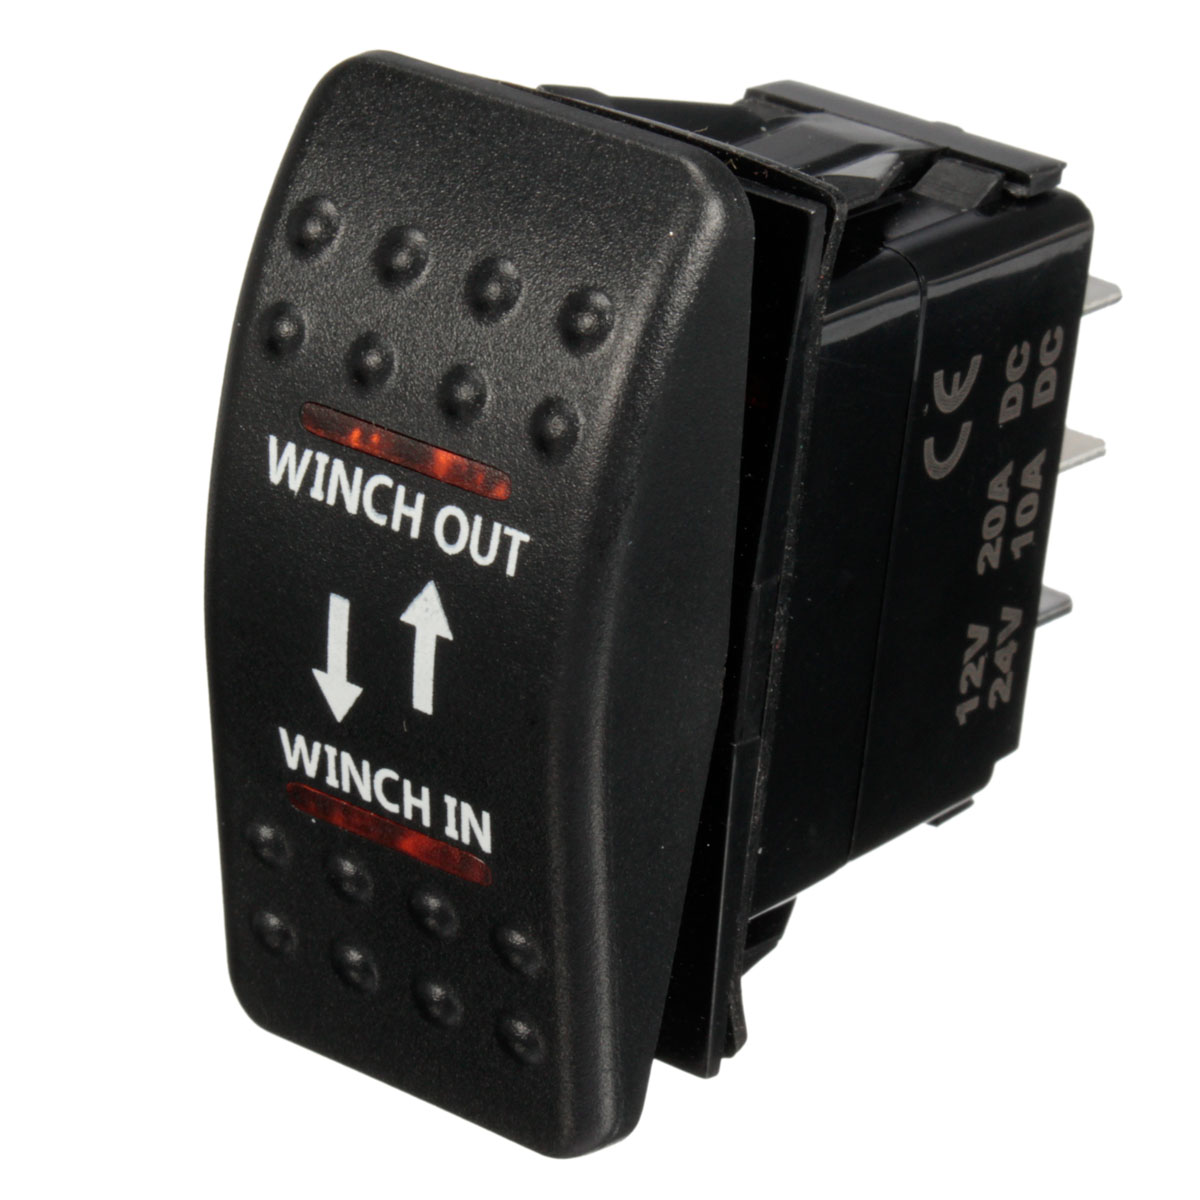 7 Pins 12V 20A Winch In Winch Out Rocker Switch Car Boat LED Winch In Winch Out Switch Button Dual Light ON-OFF-ON Universal